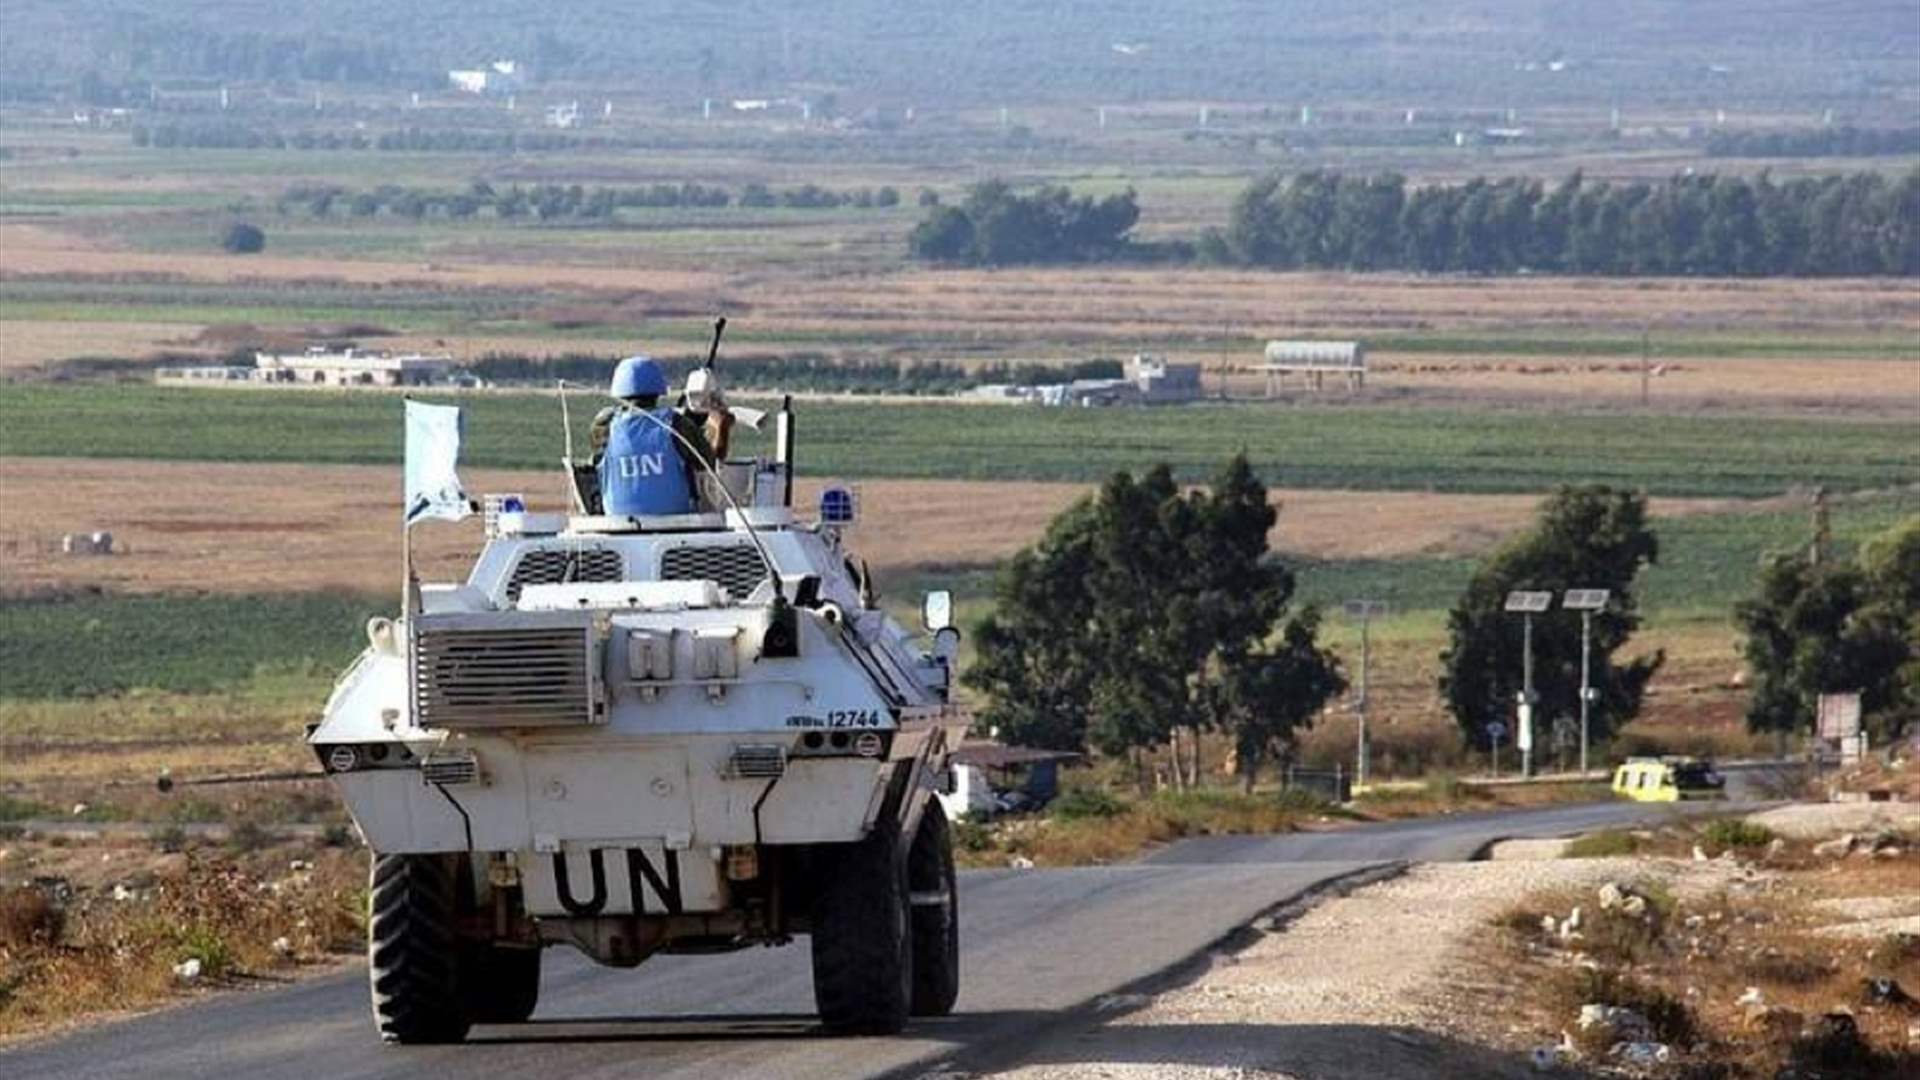 UNIFIL&#39;s statement after the injury of three observers in southern Lebanon